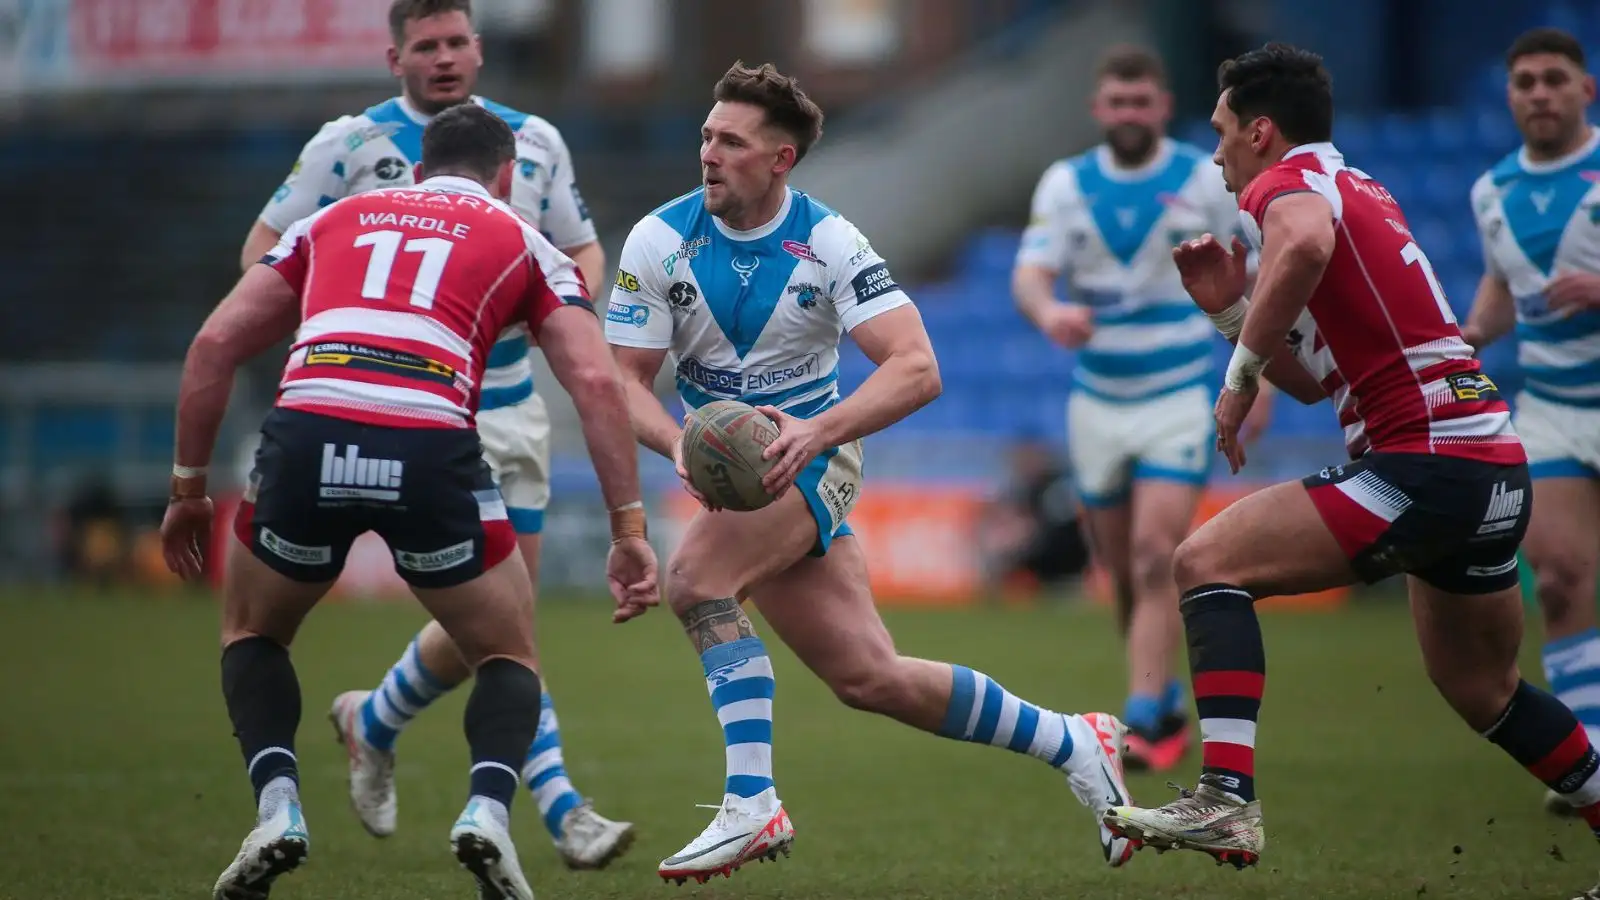 Featherstone Rovers snap up ex-Castleford Tigers ace following release from fellow Championship club